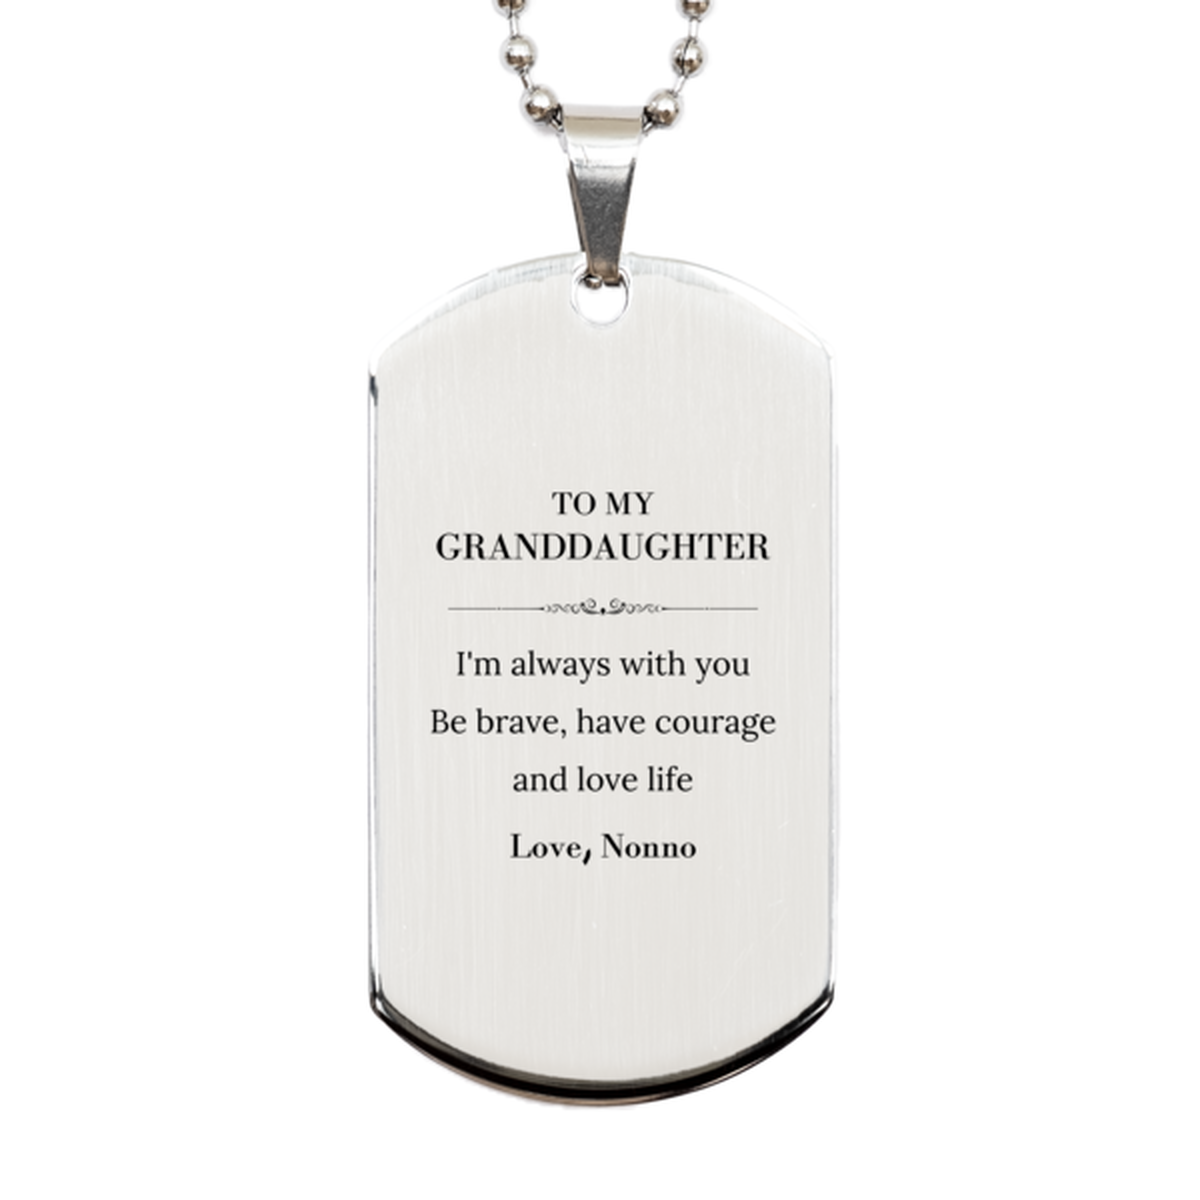 To My Granddaughter Gifts from Nonno, Unique Silver Dog Tag Inspirational Christmas Birthday Graduation Gifts for Granddaughter I'm always with you. Be brave, have courage and love life. Love, Nonno